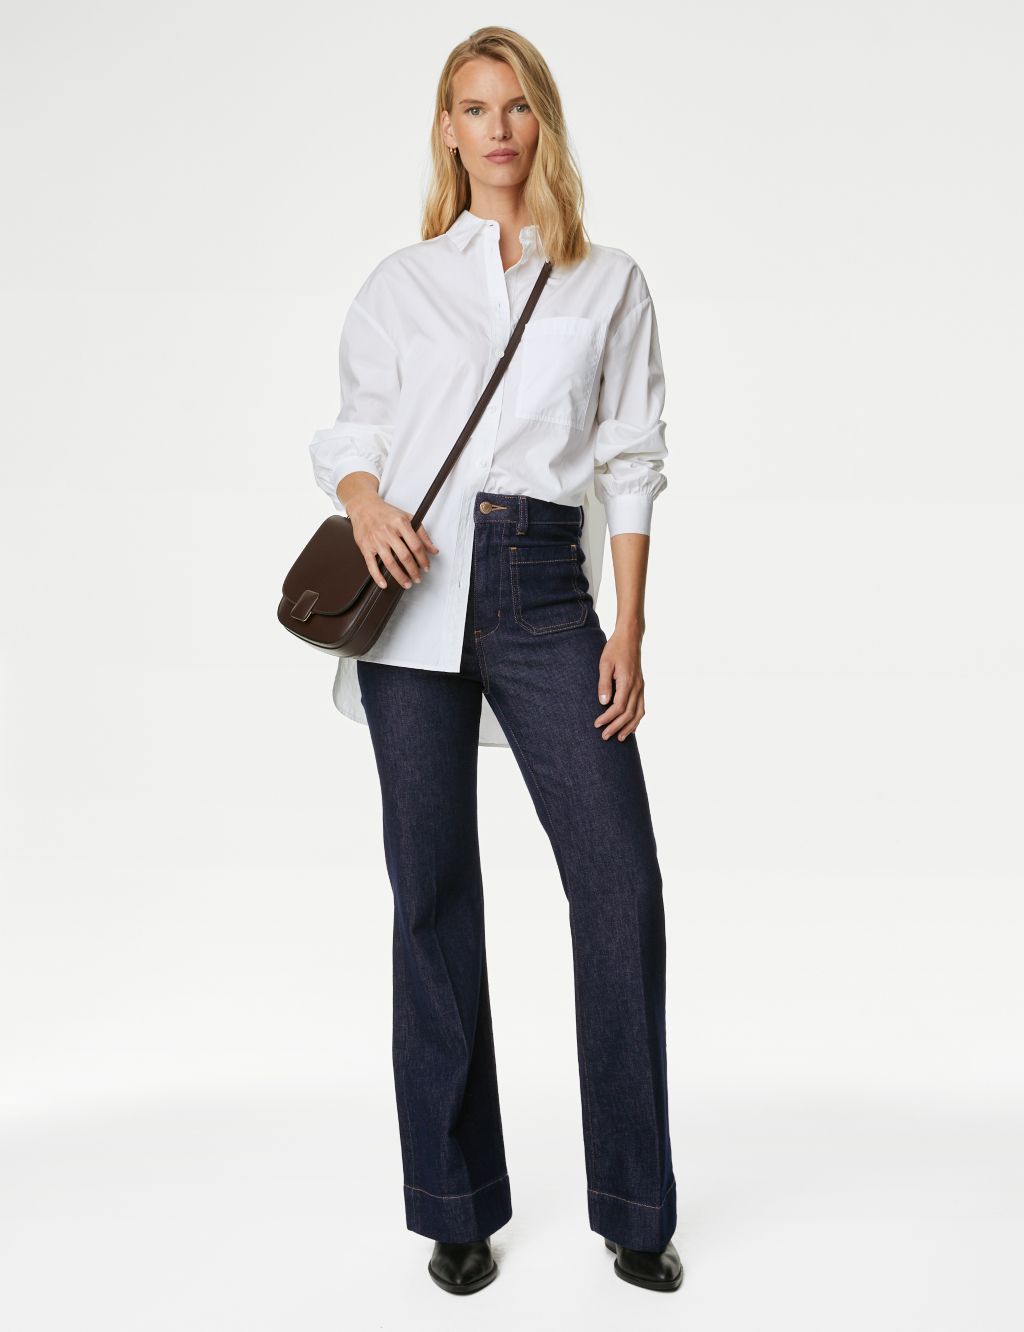 Patch Pocket Flare High Waisted Jeans image 3